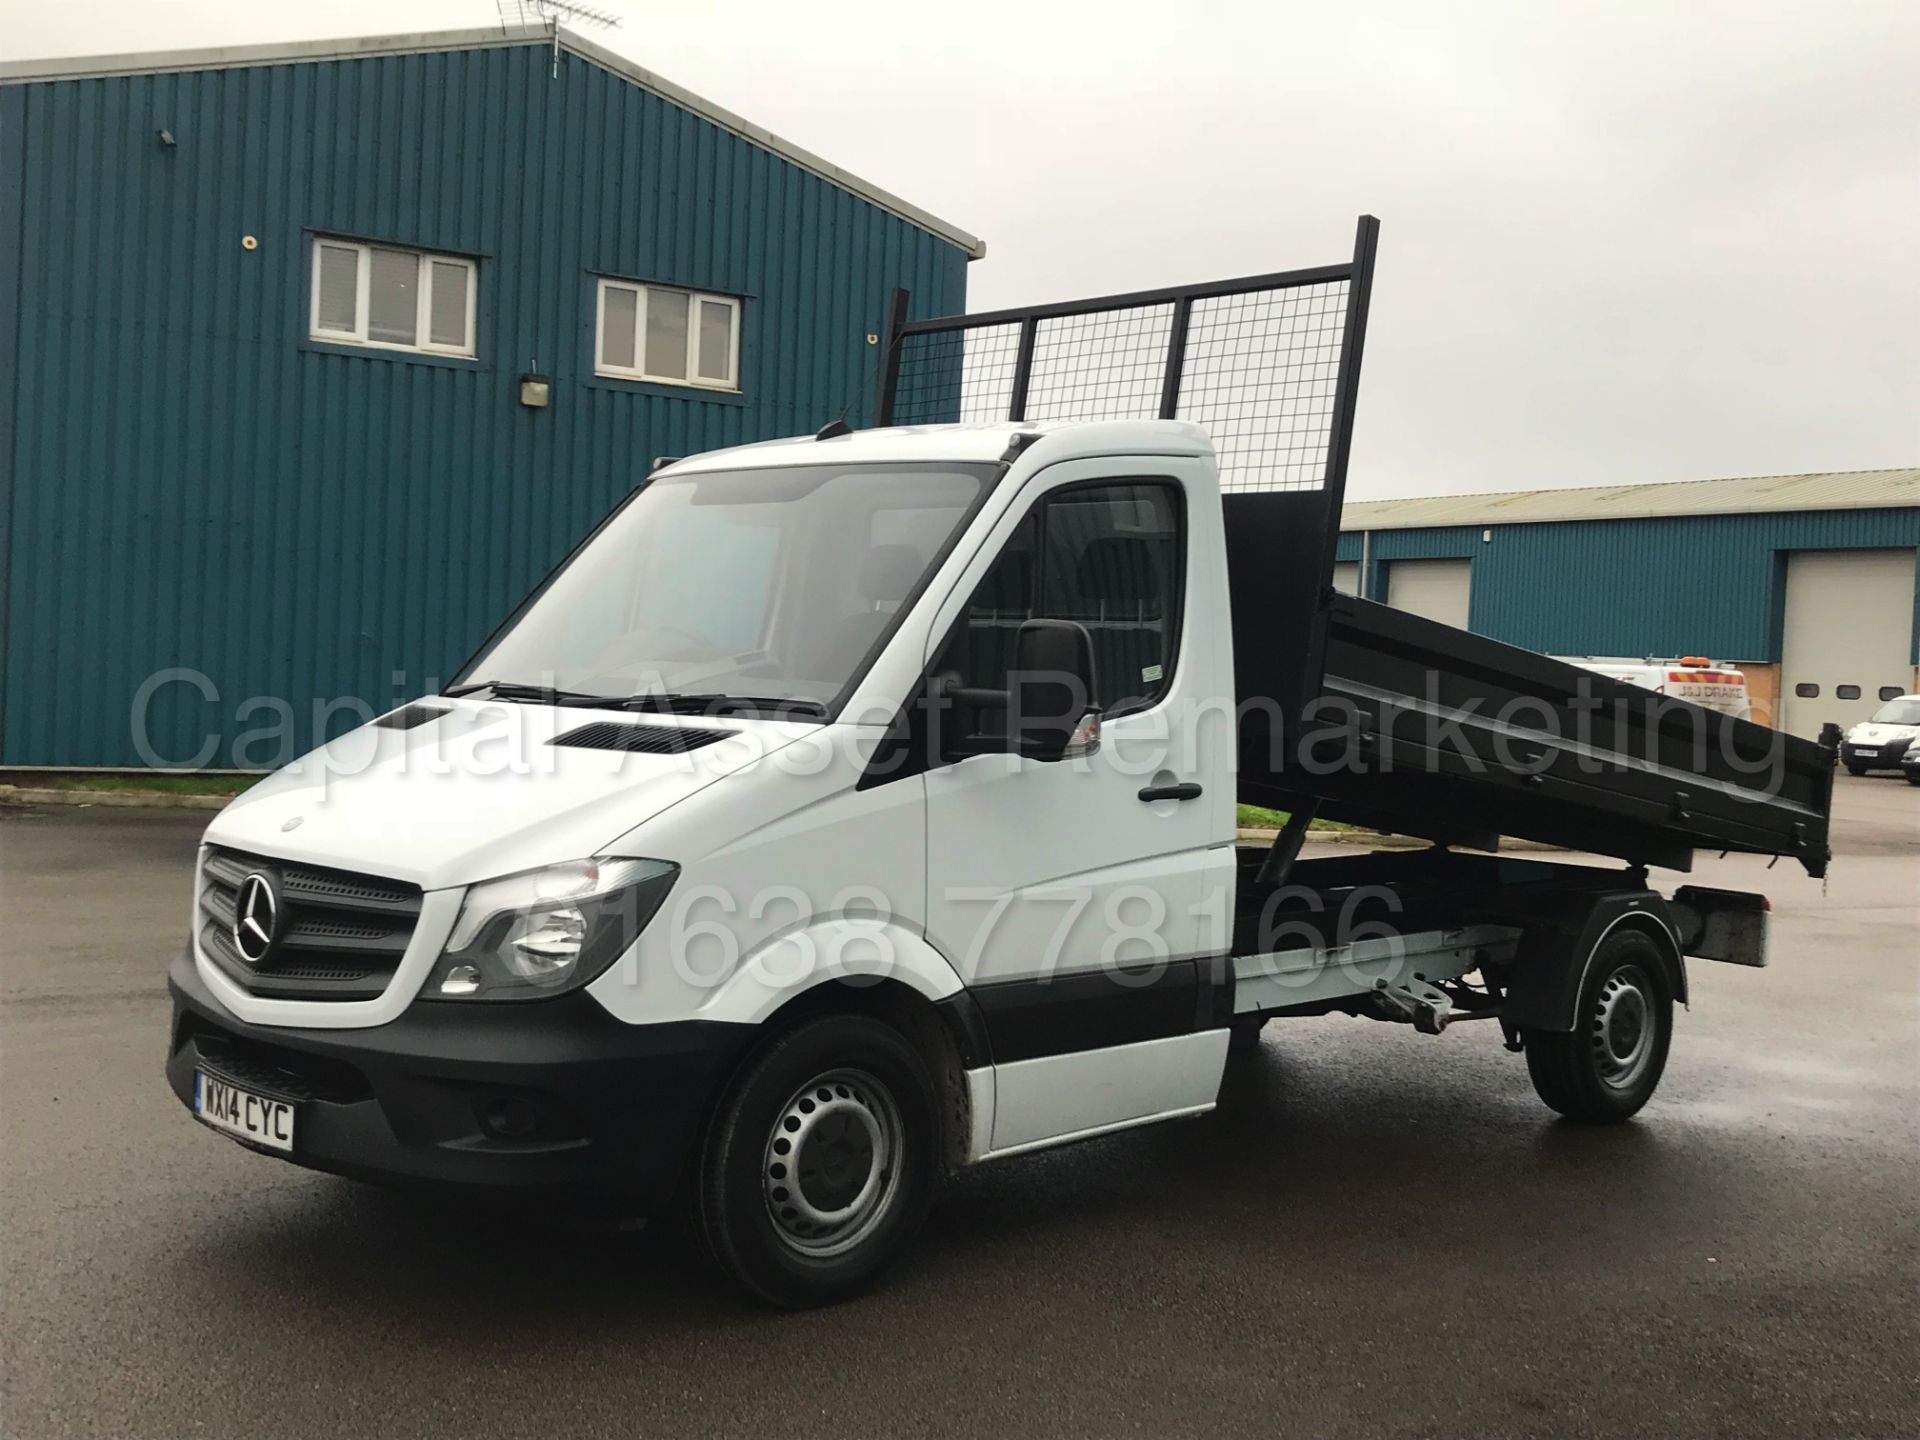 (ON SALE) MERCEDES-BENZ SPRINTER 313 CDI 'LWB - TIPPER' (2014 FACELIFT) '130 BHP -6 SPEED' *1 OWNER* - Image 3 of 24